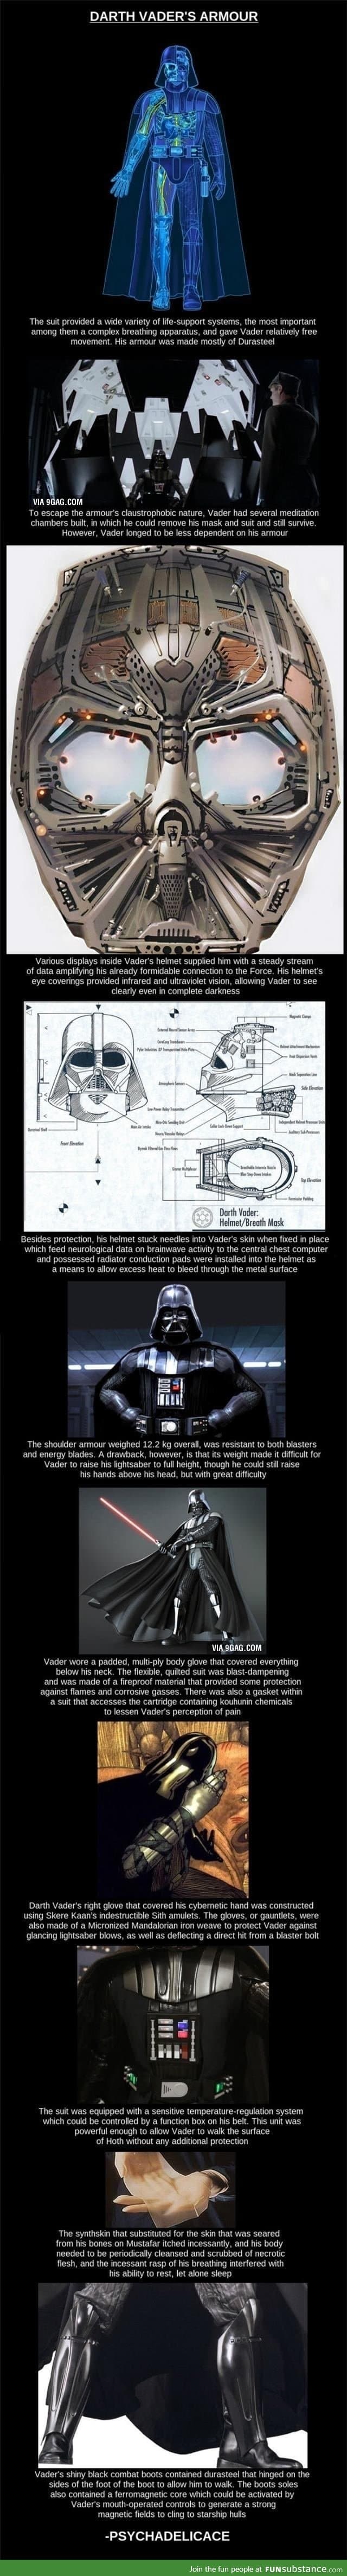 Vader's Suit